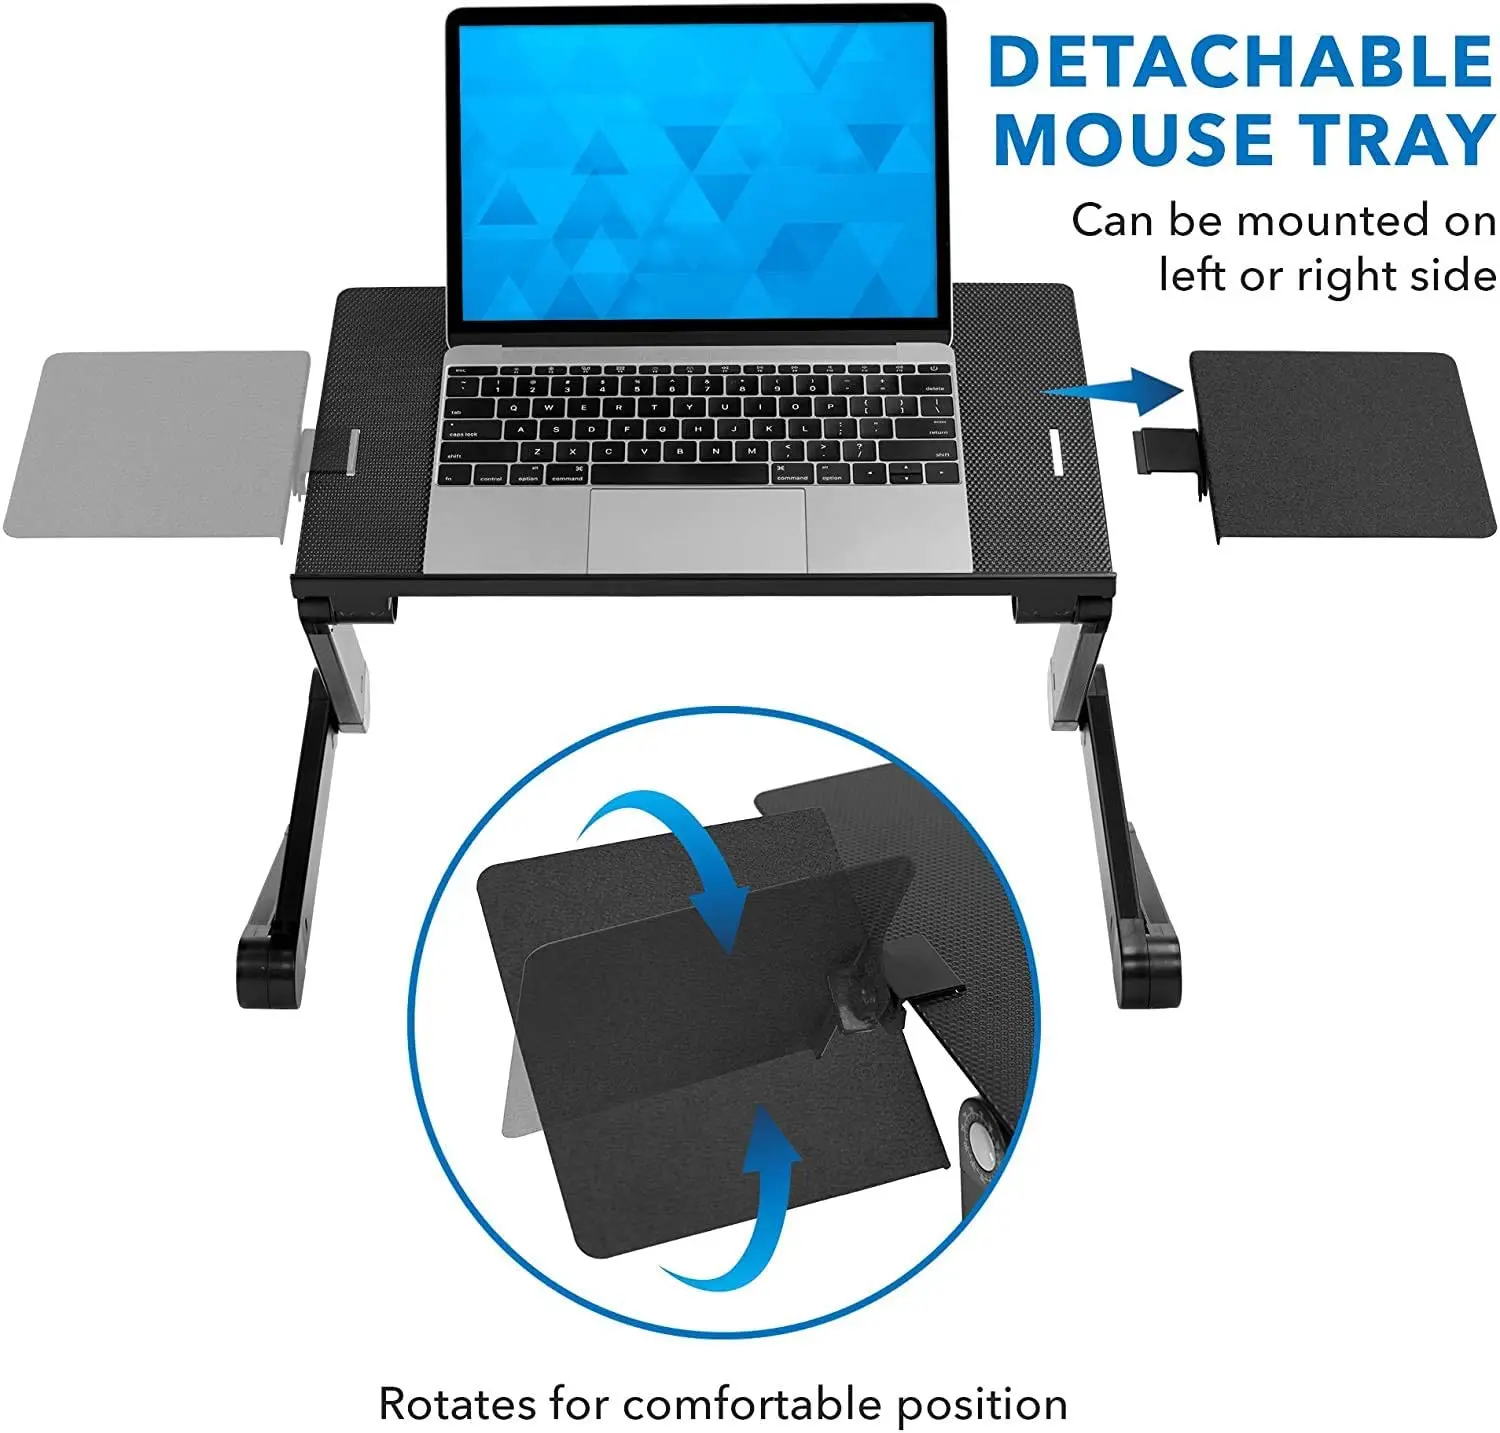 Adjustable and Portable Laptop Stand with Cooling fans & Mouse pad.